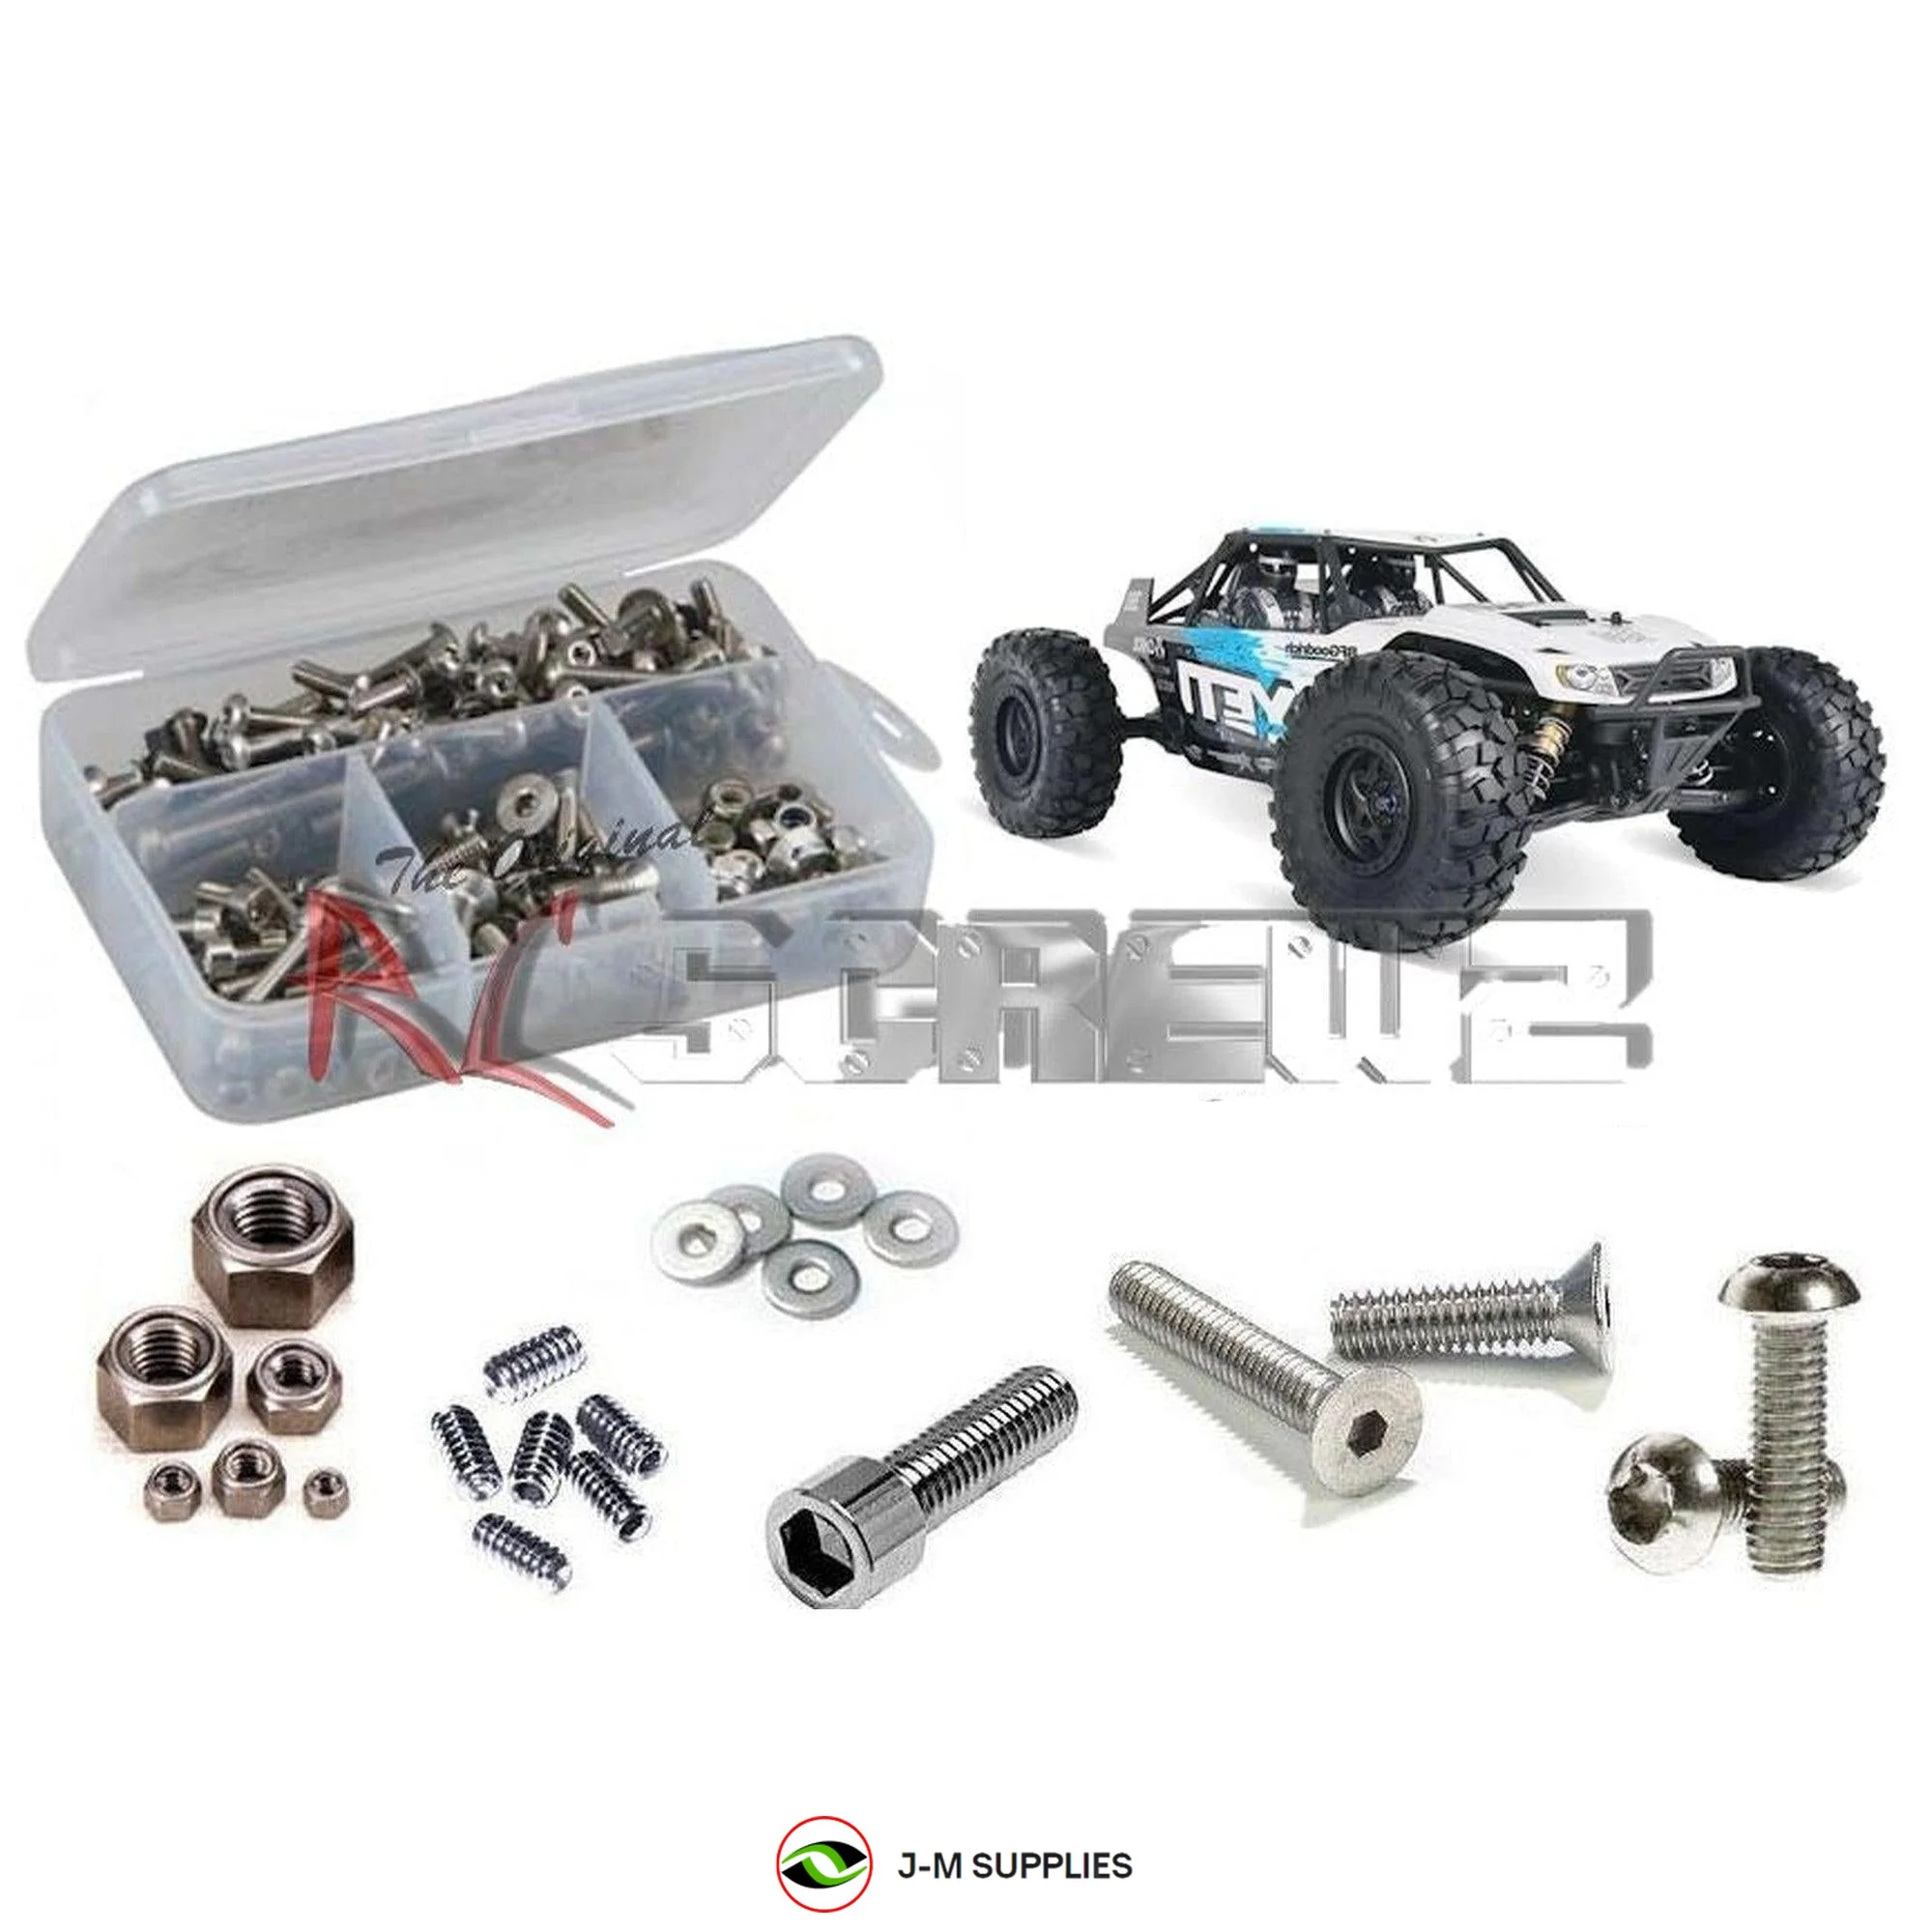 RCScrewZ Stainless Steel Screw Kit axi014 for Axial Yeti 1/10th 4wd #90025/26 - Picture 1 of 12